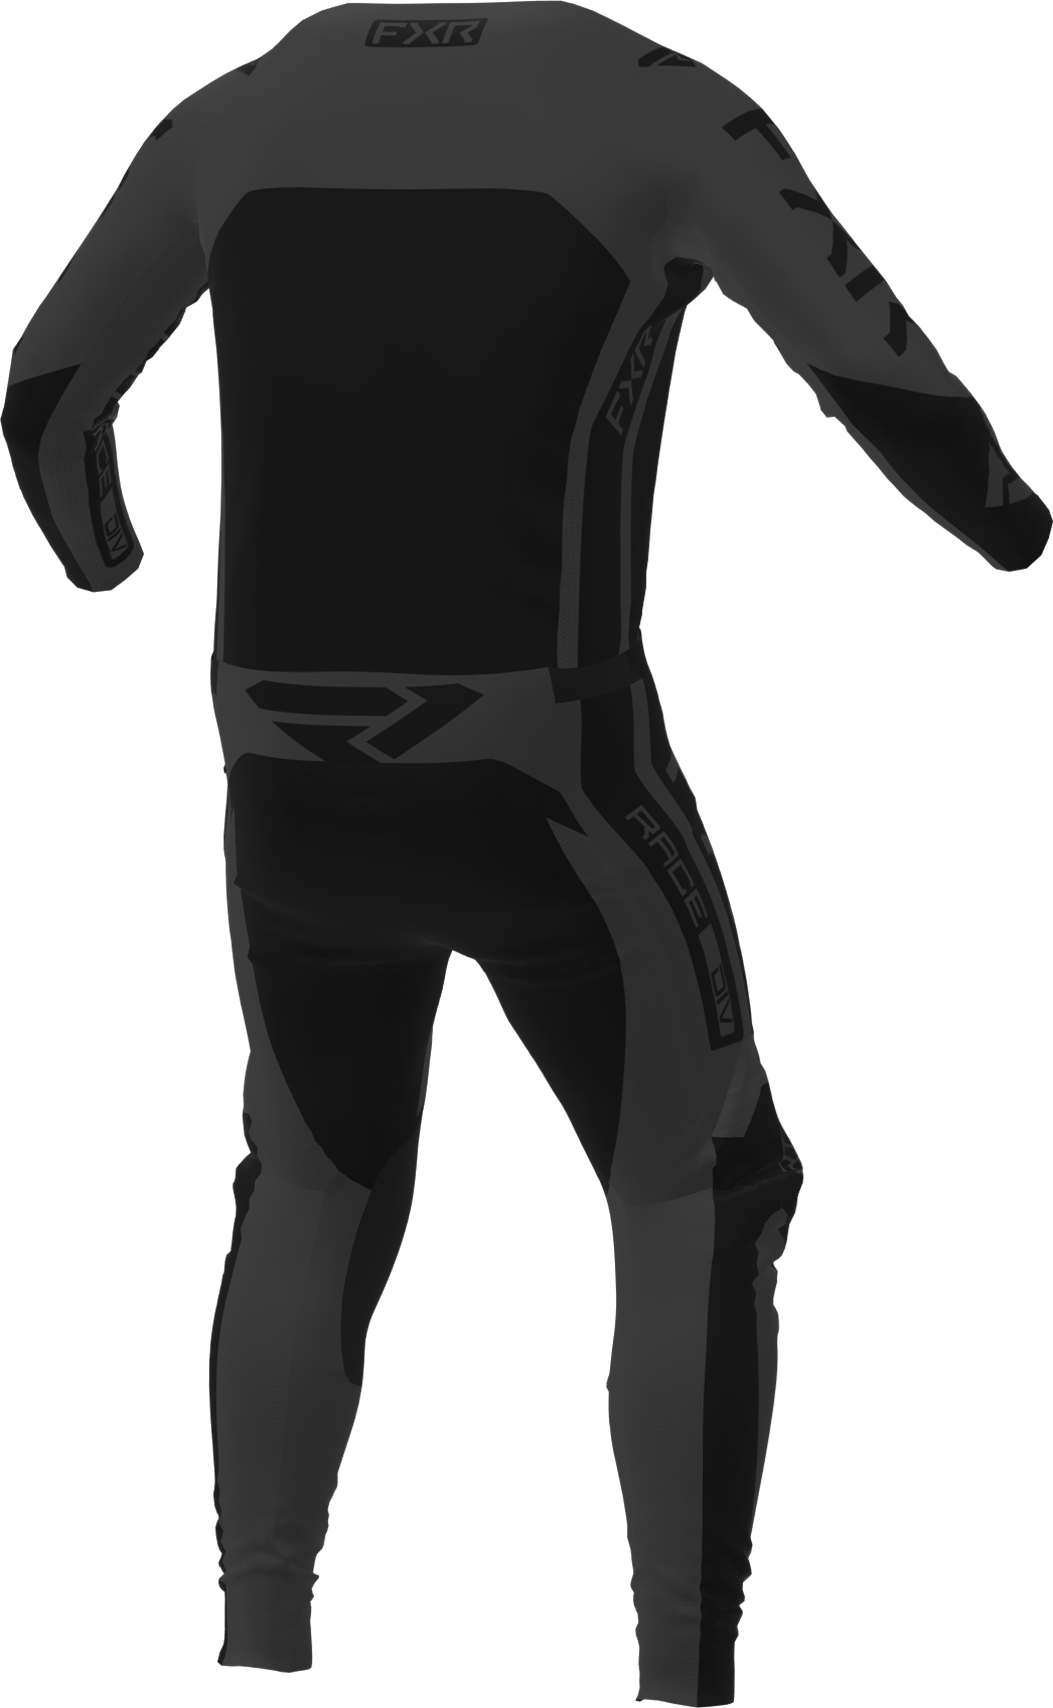 A 3D image of FXR's Contender MX Jersey and Pant in Black Ops colorway